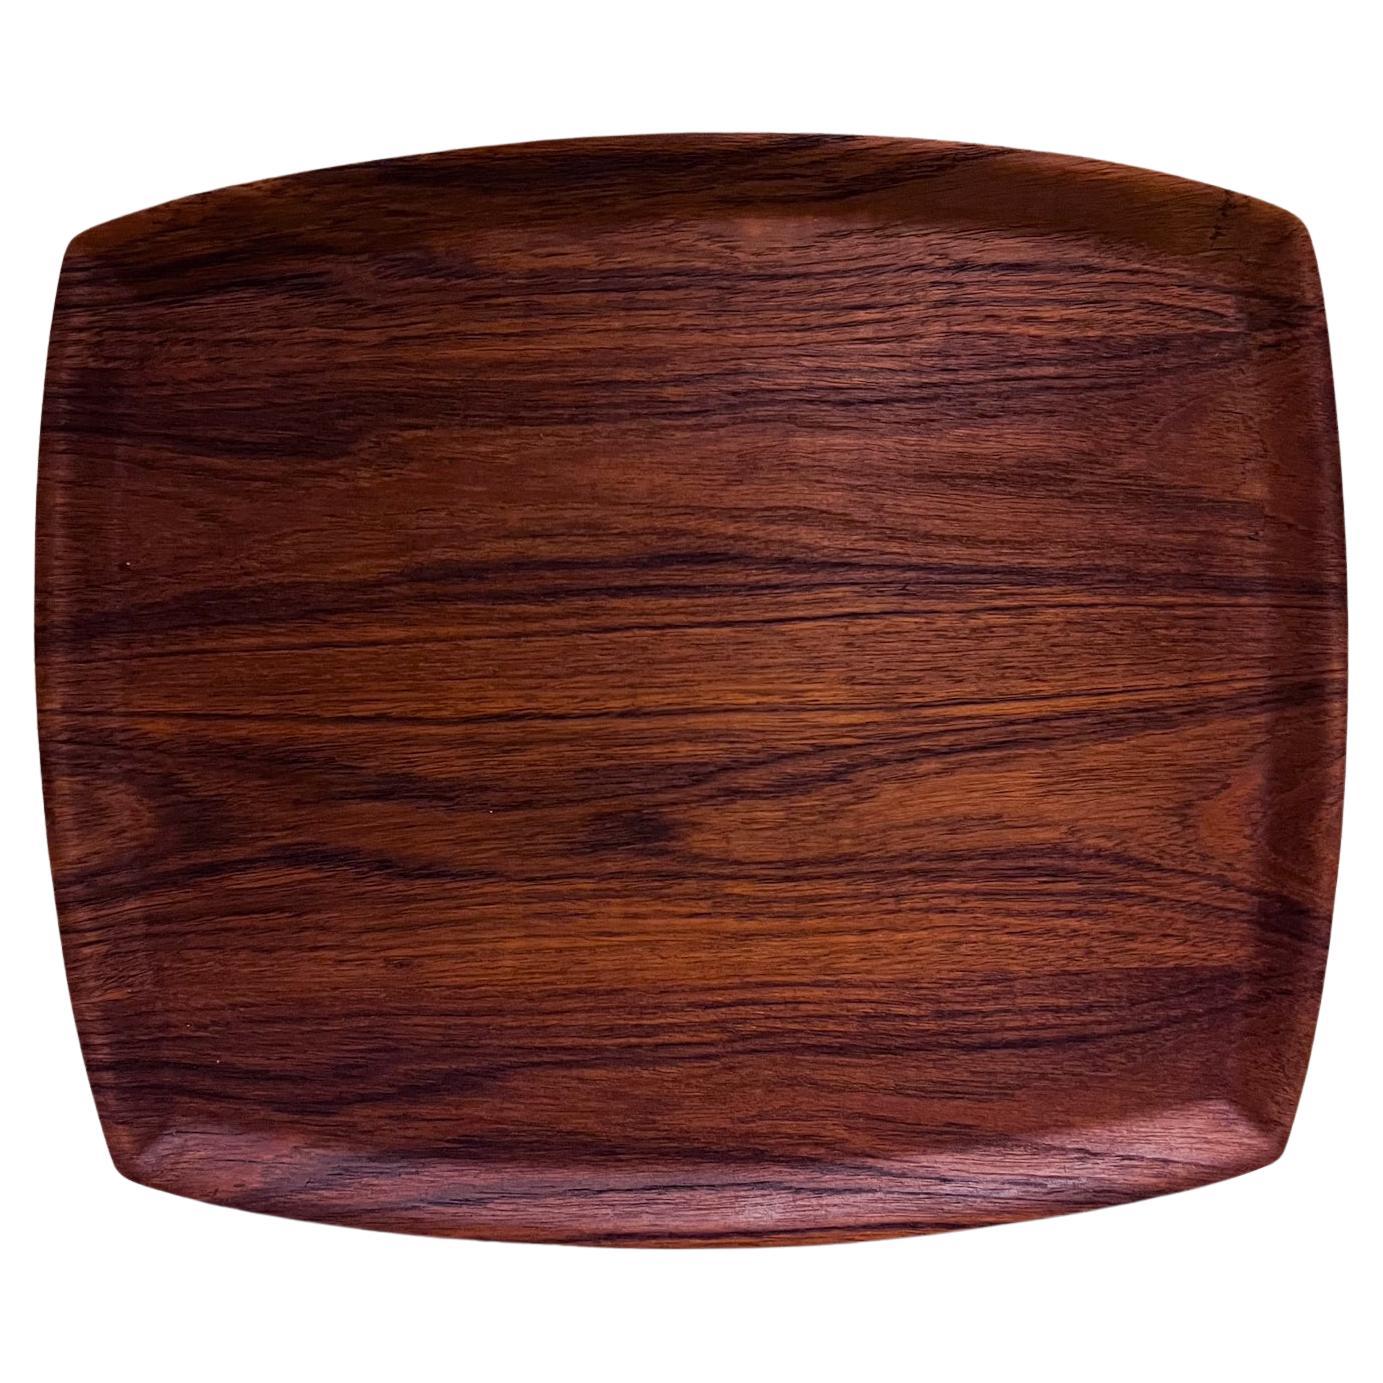 1960s Wood Teak Tray from Sweden Style Jens Quistgaard For Sale